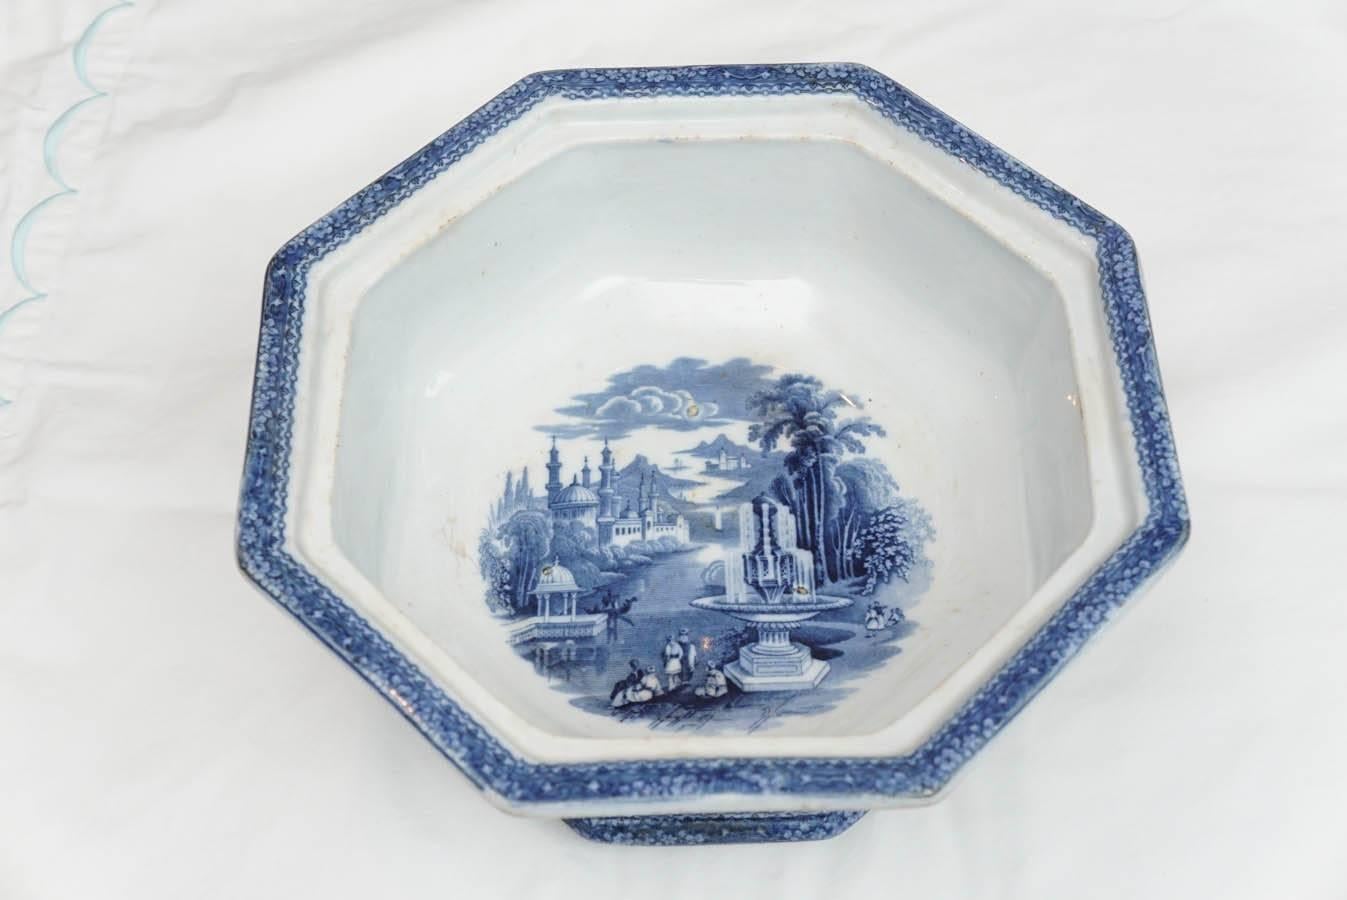 Staffordshire Blue & White Transfer Decorated Covered Bowl/Tureen, 19th Century 1